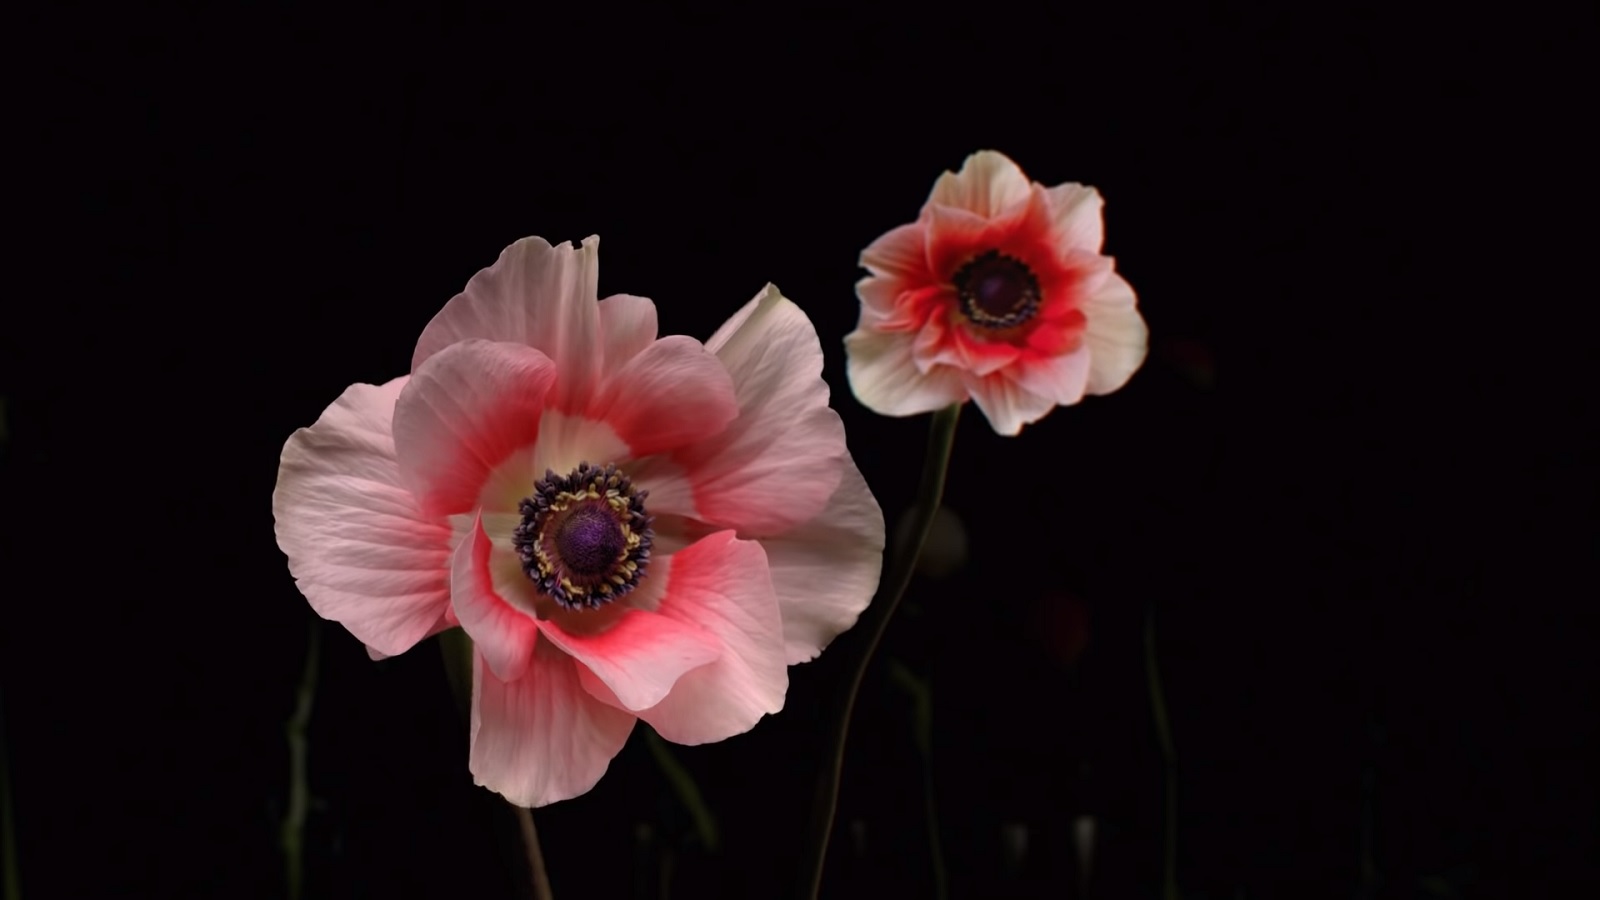 Behold! Beautiful Flowers Burst into a Spectacular Show